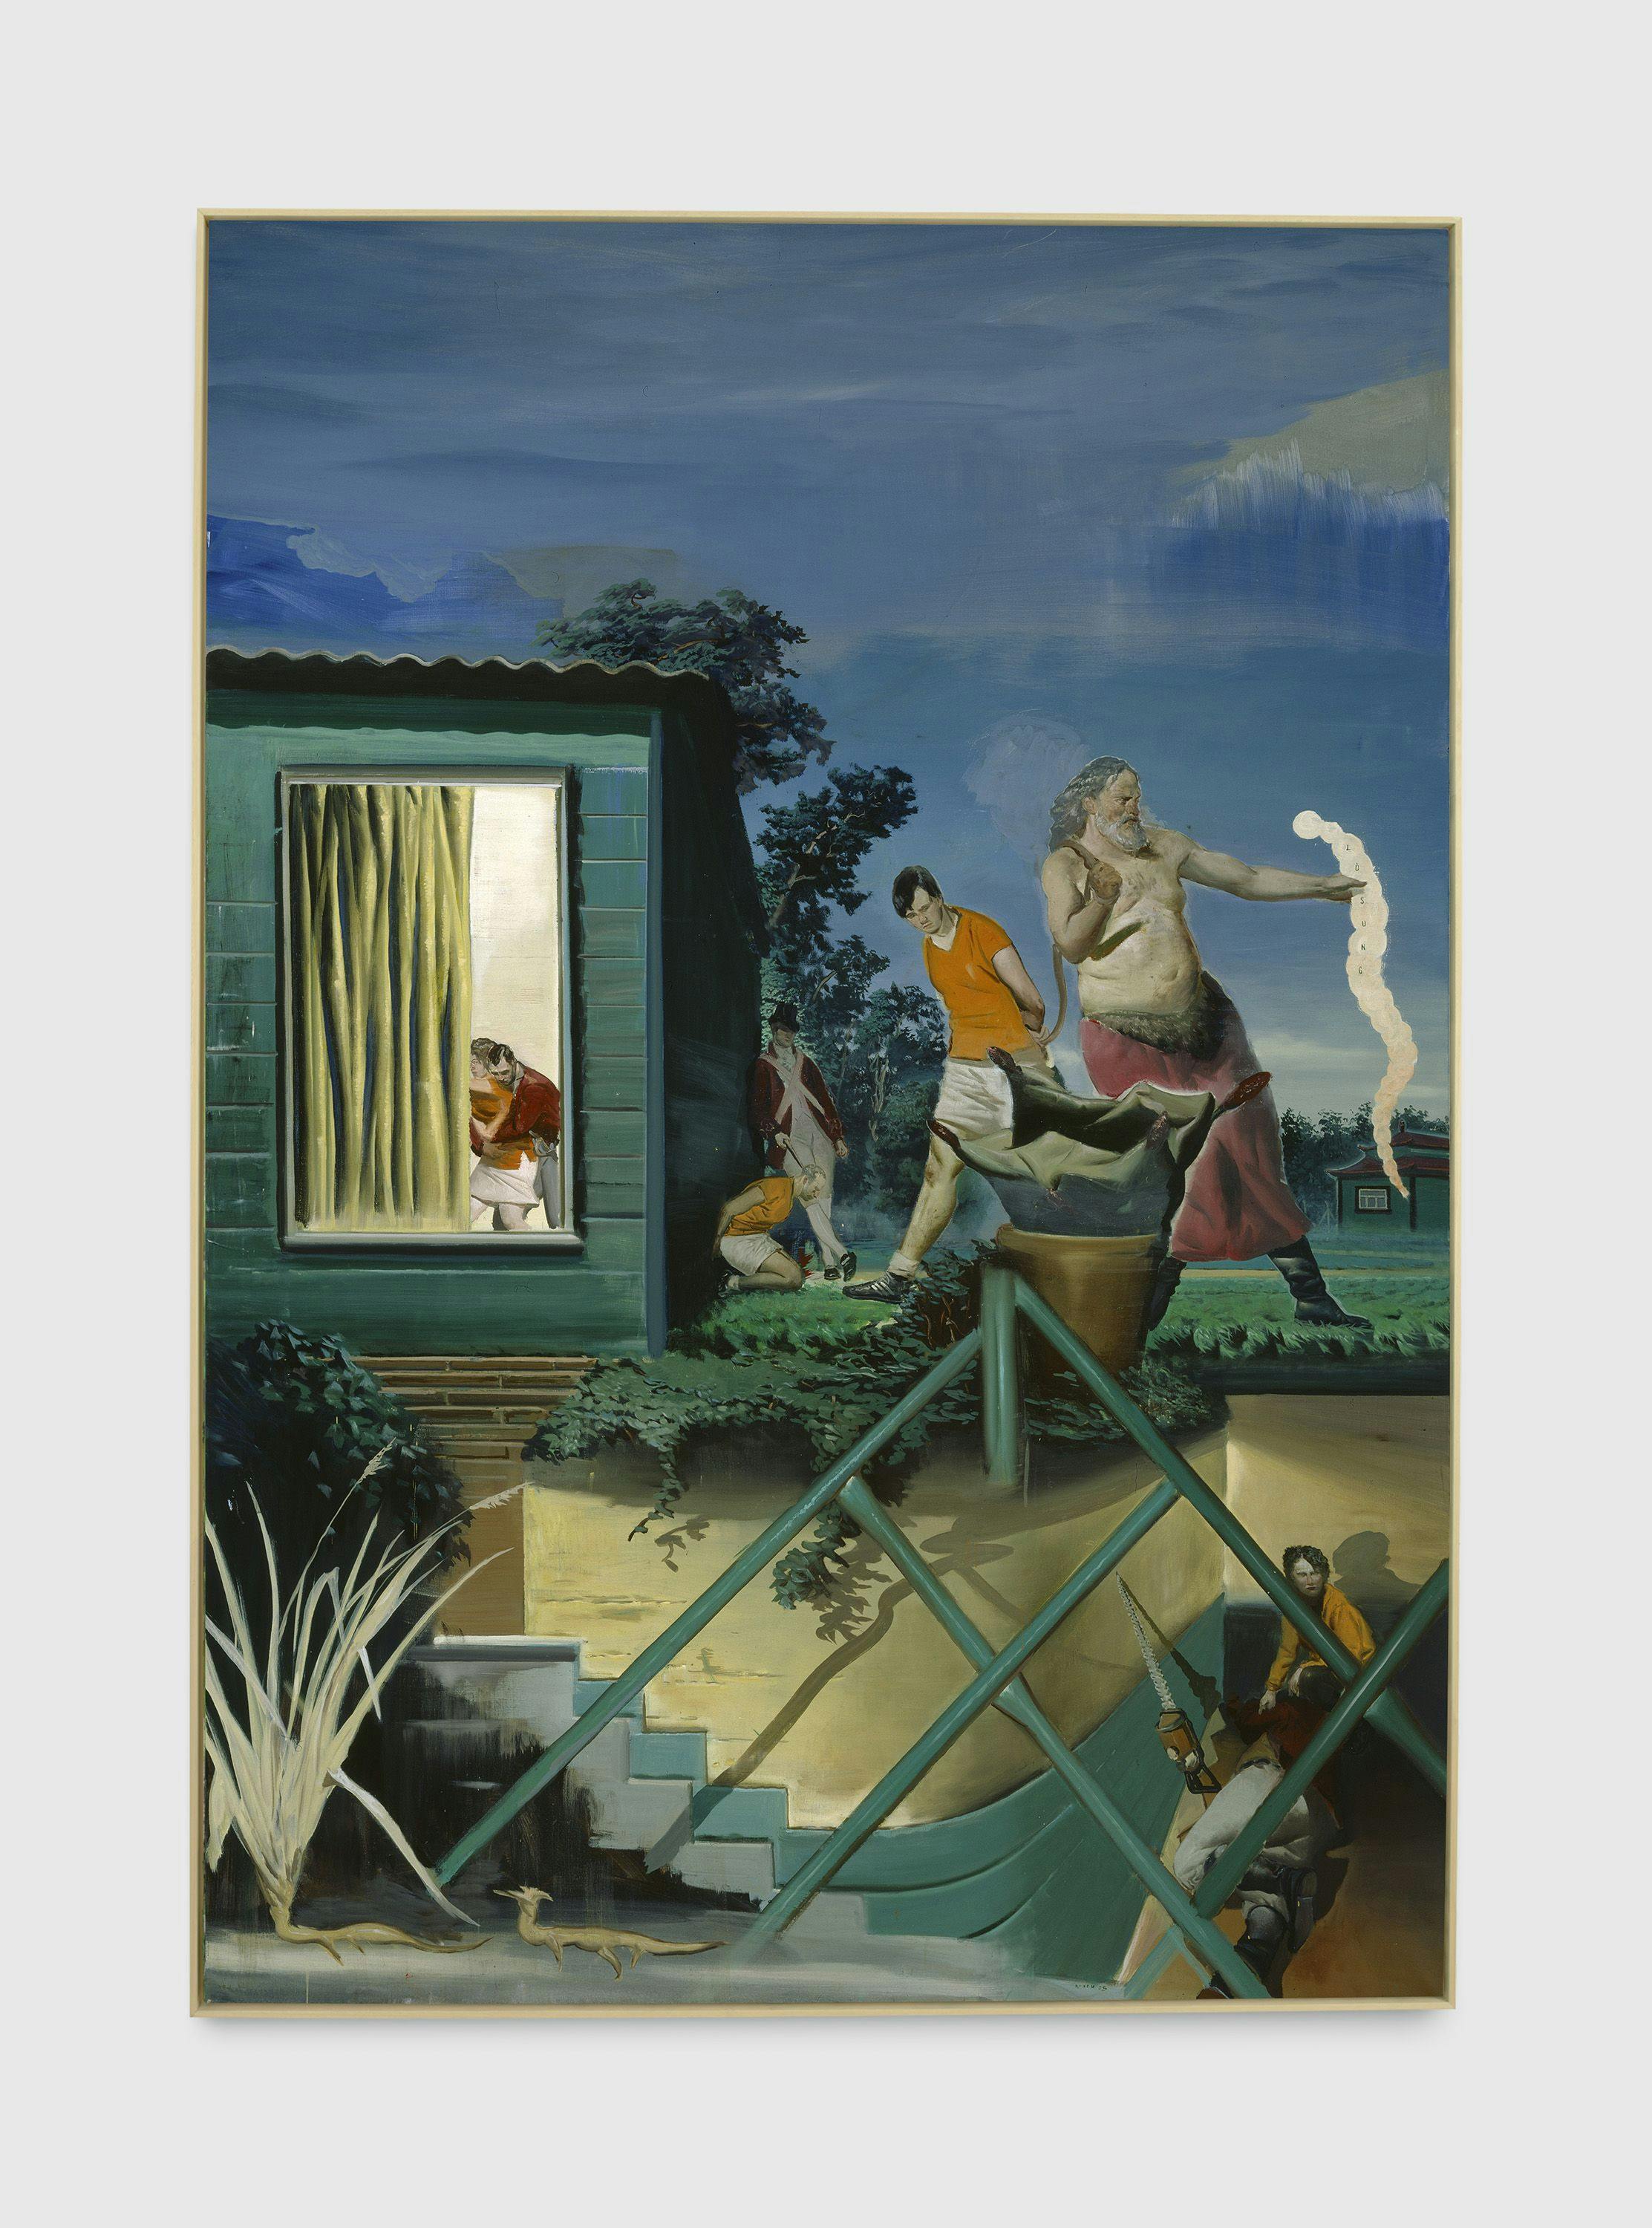 A painting by Neo Rauch, titled Lösung, dated 2005.